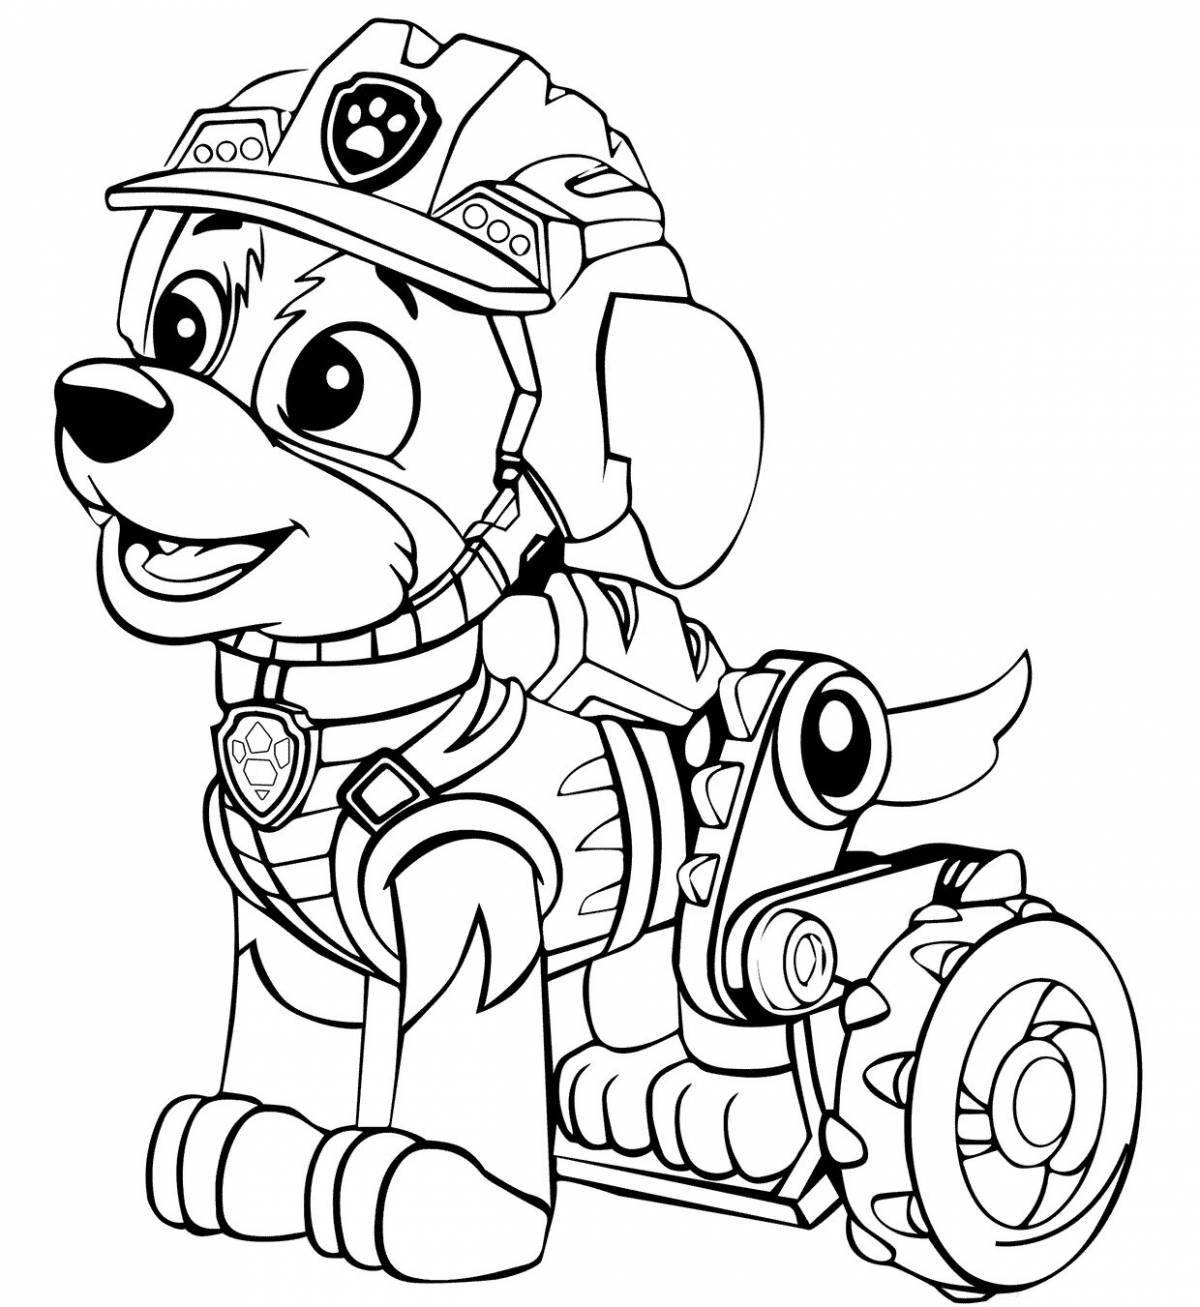 Paw patrol pirates majestic coloring pages